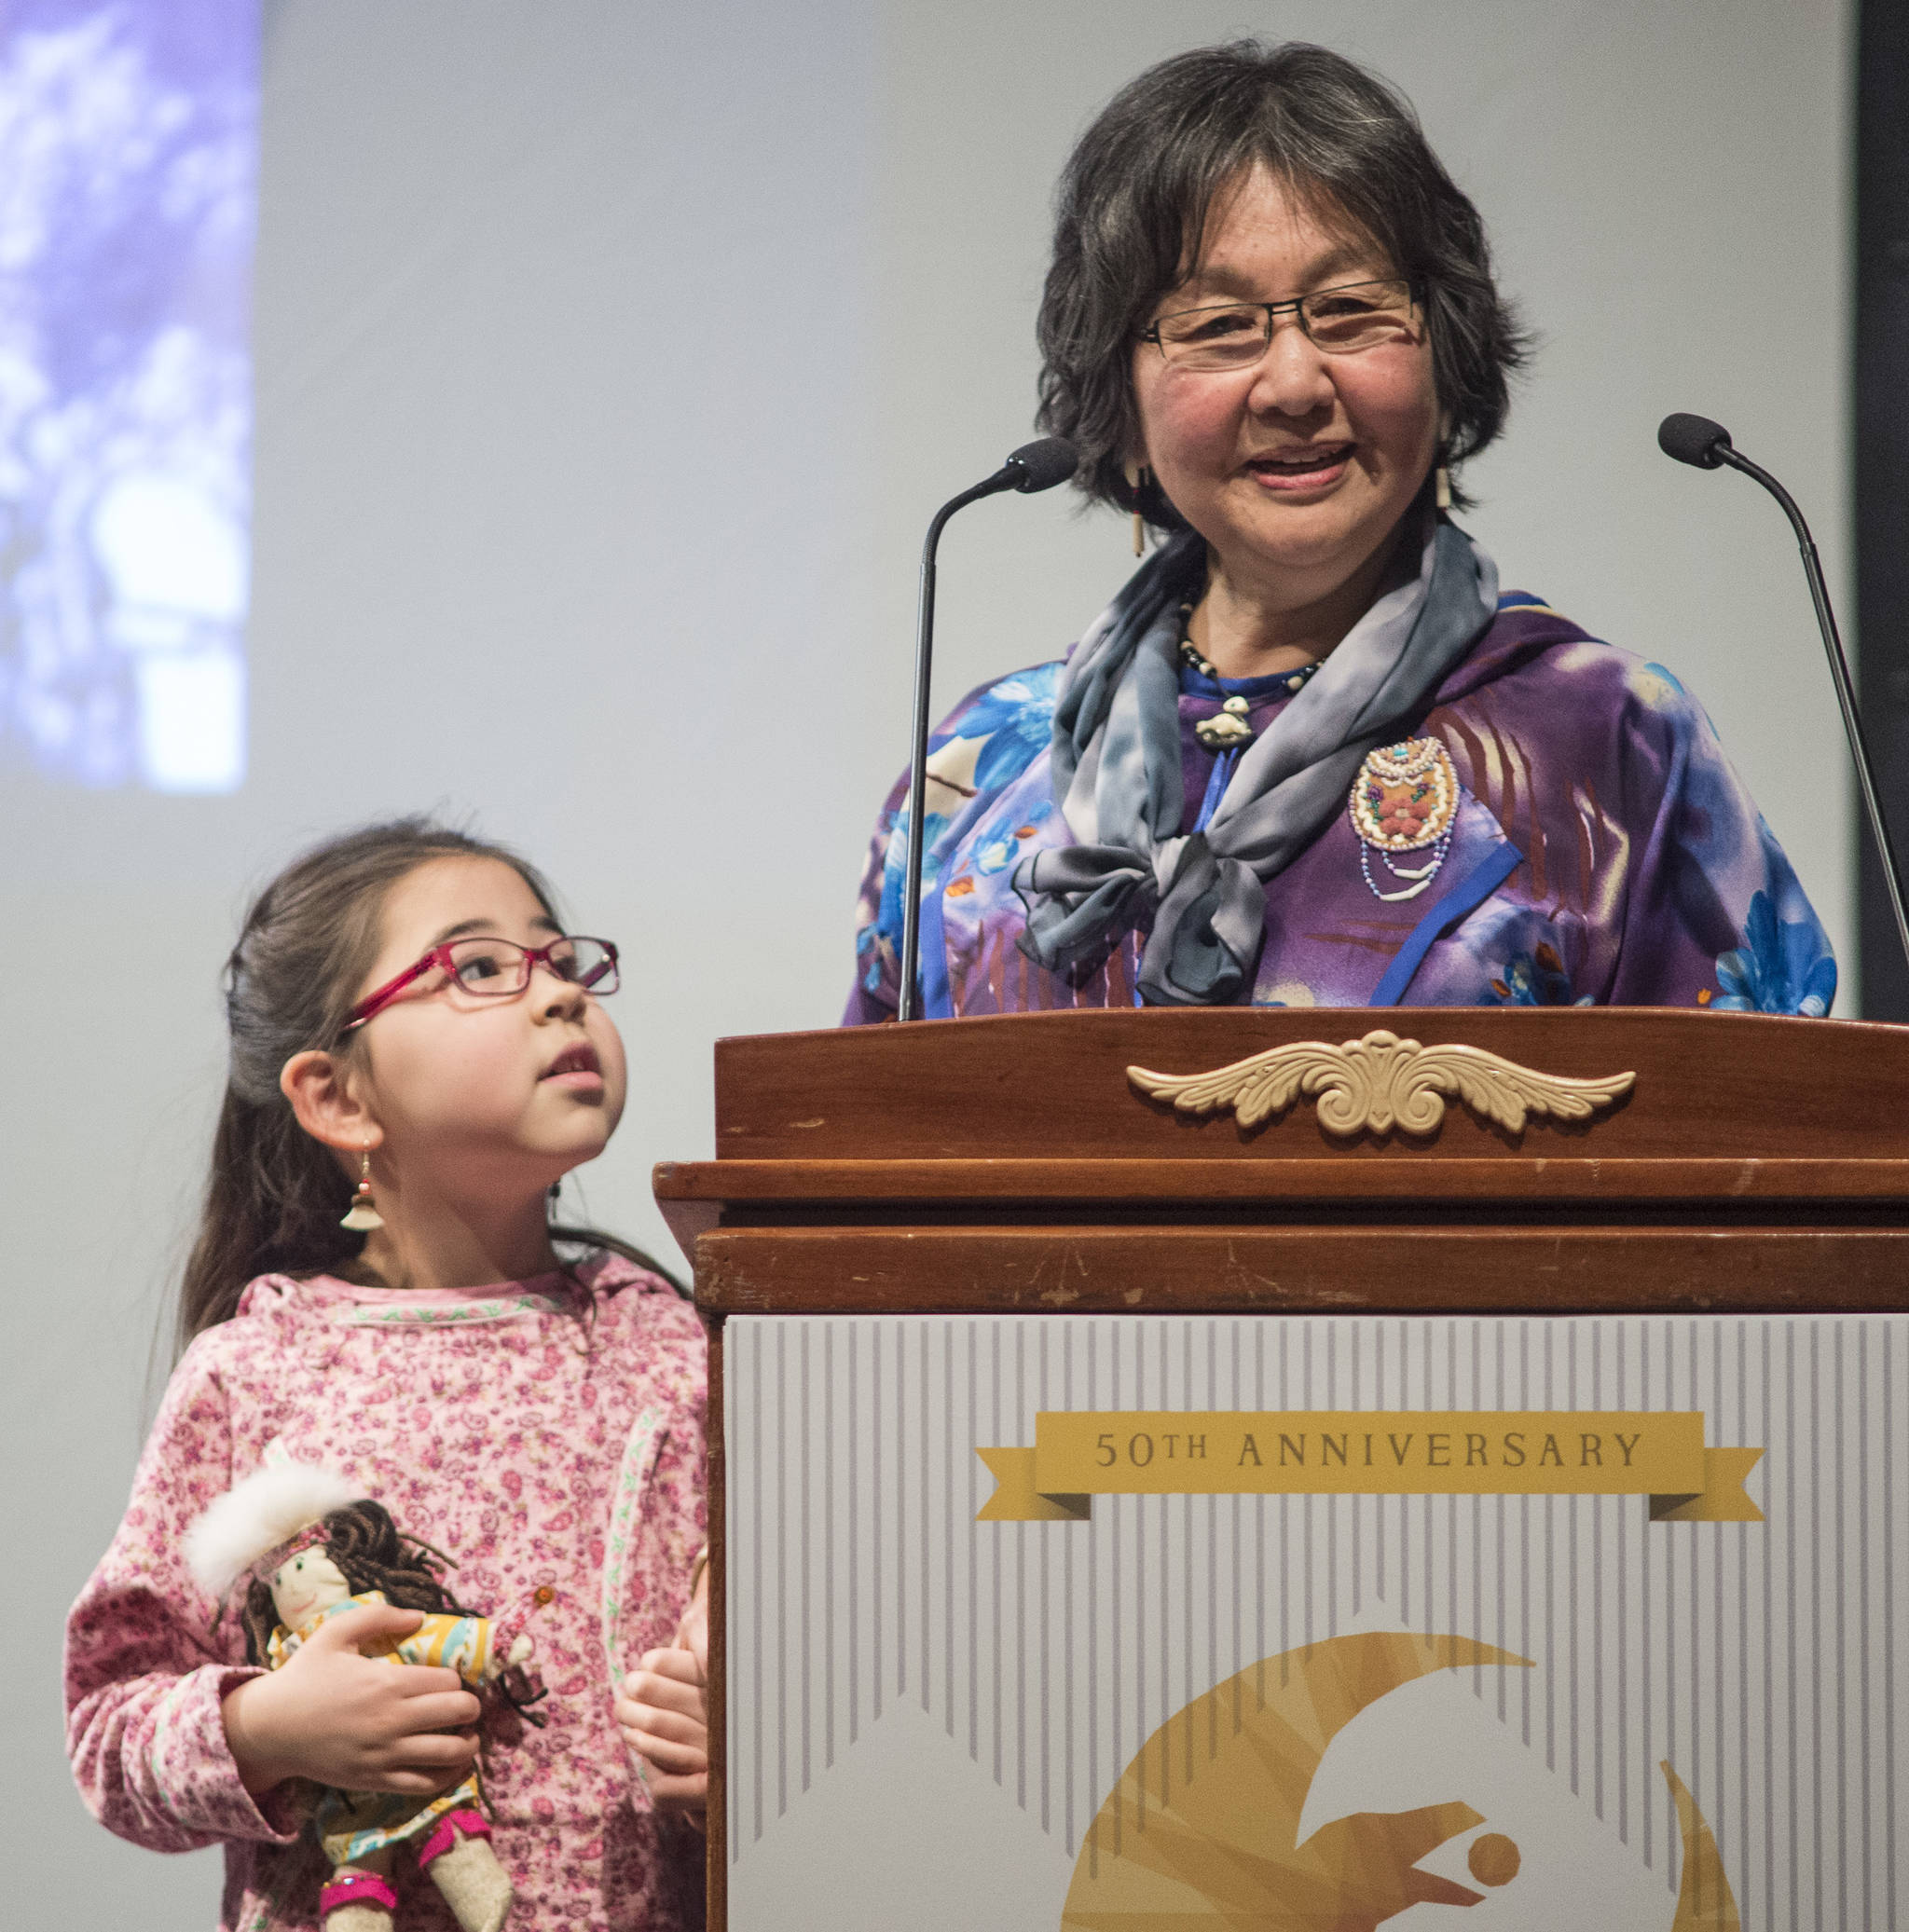 Nita Yurrliq Rearden, of Homer, receives her Arts Education Award with her granddaughter, Paula, 7, at the 2019 Governor’s Arts and Humanities Awards at the Juneau Arts & Culture Center on Thursday, Feb. 7, 2019. (Michael Penn | Juneau Empire)